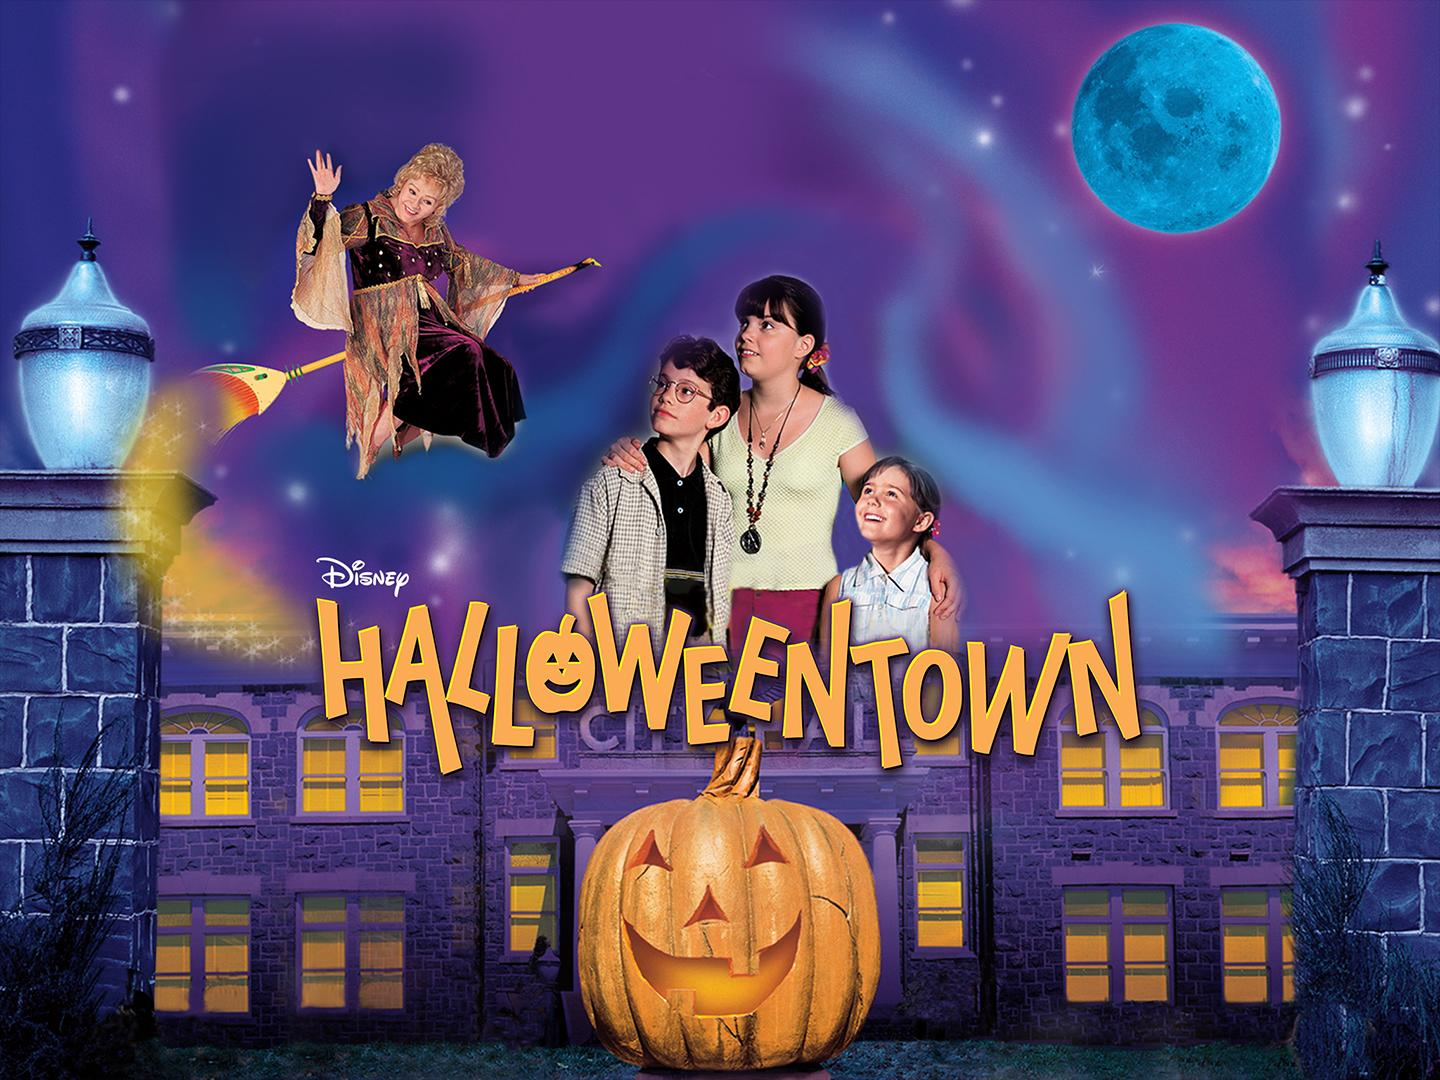 Halloween Town: A Magical Place Where You Can Experience the Spirit of Halloween